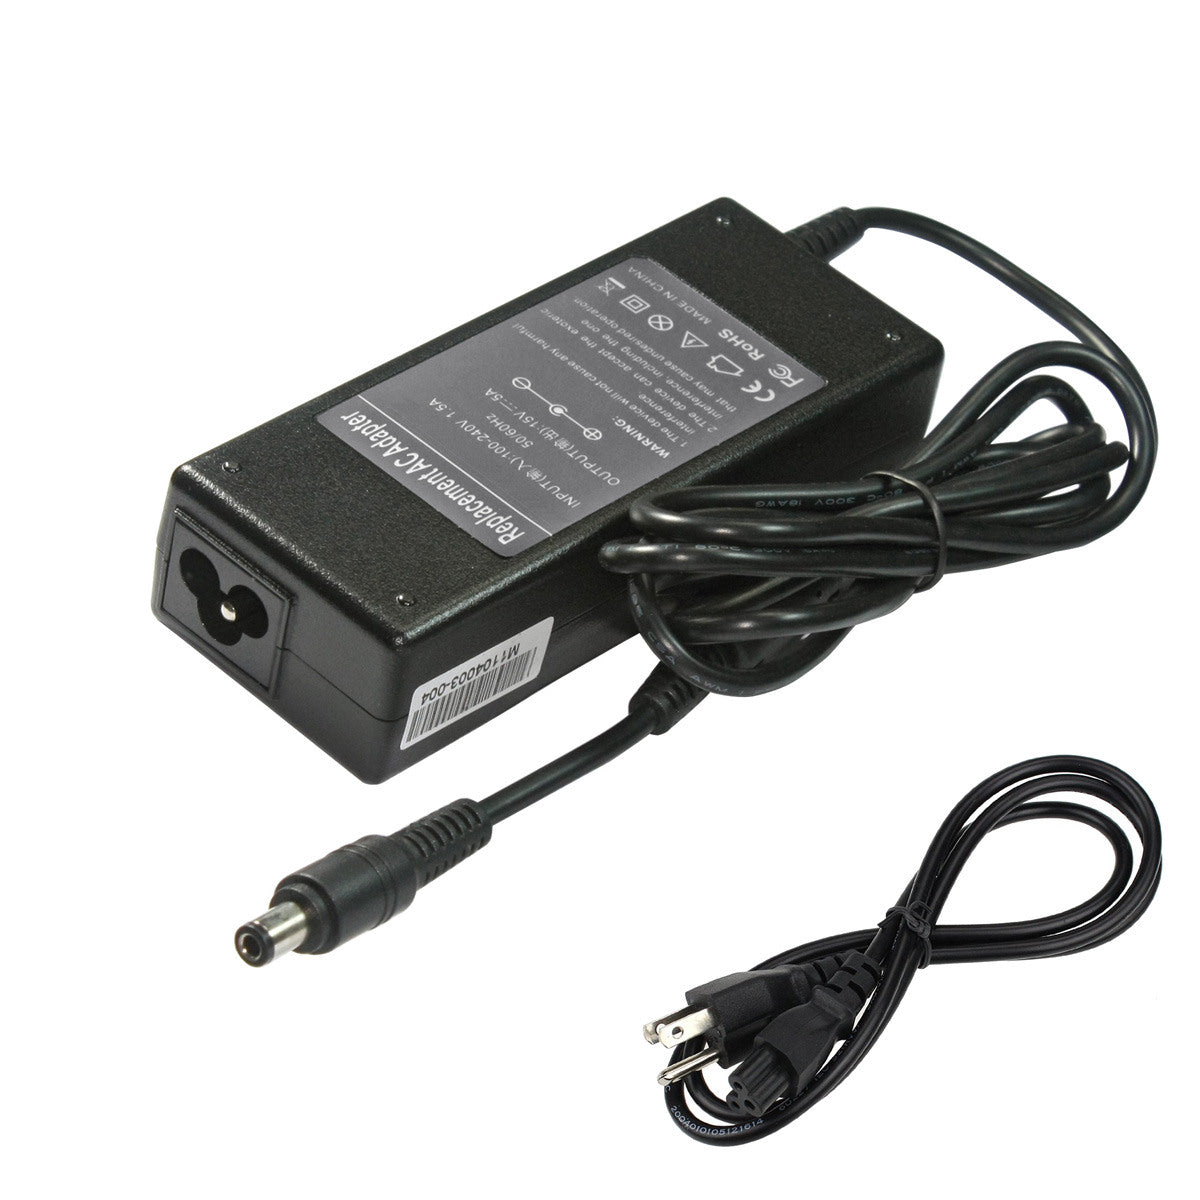 Compatible Replacement Toshiba Satellite M55-S325 AC Adapter 75Watt 15V 5A.